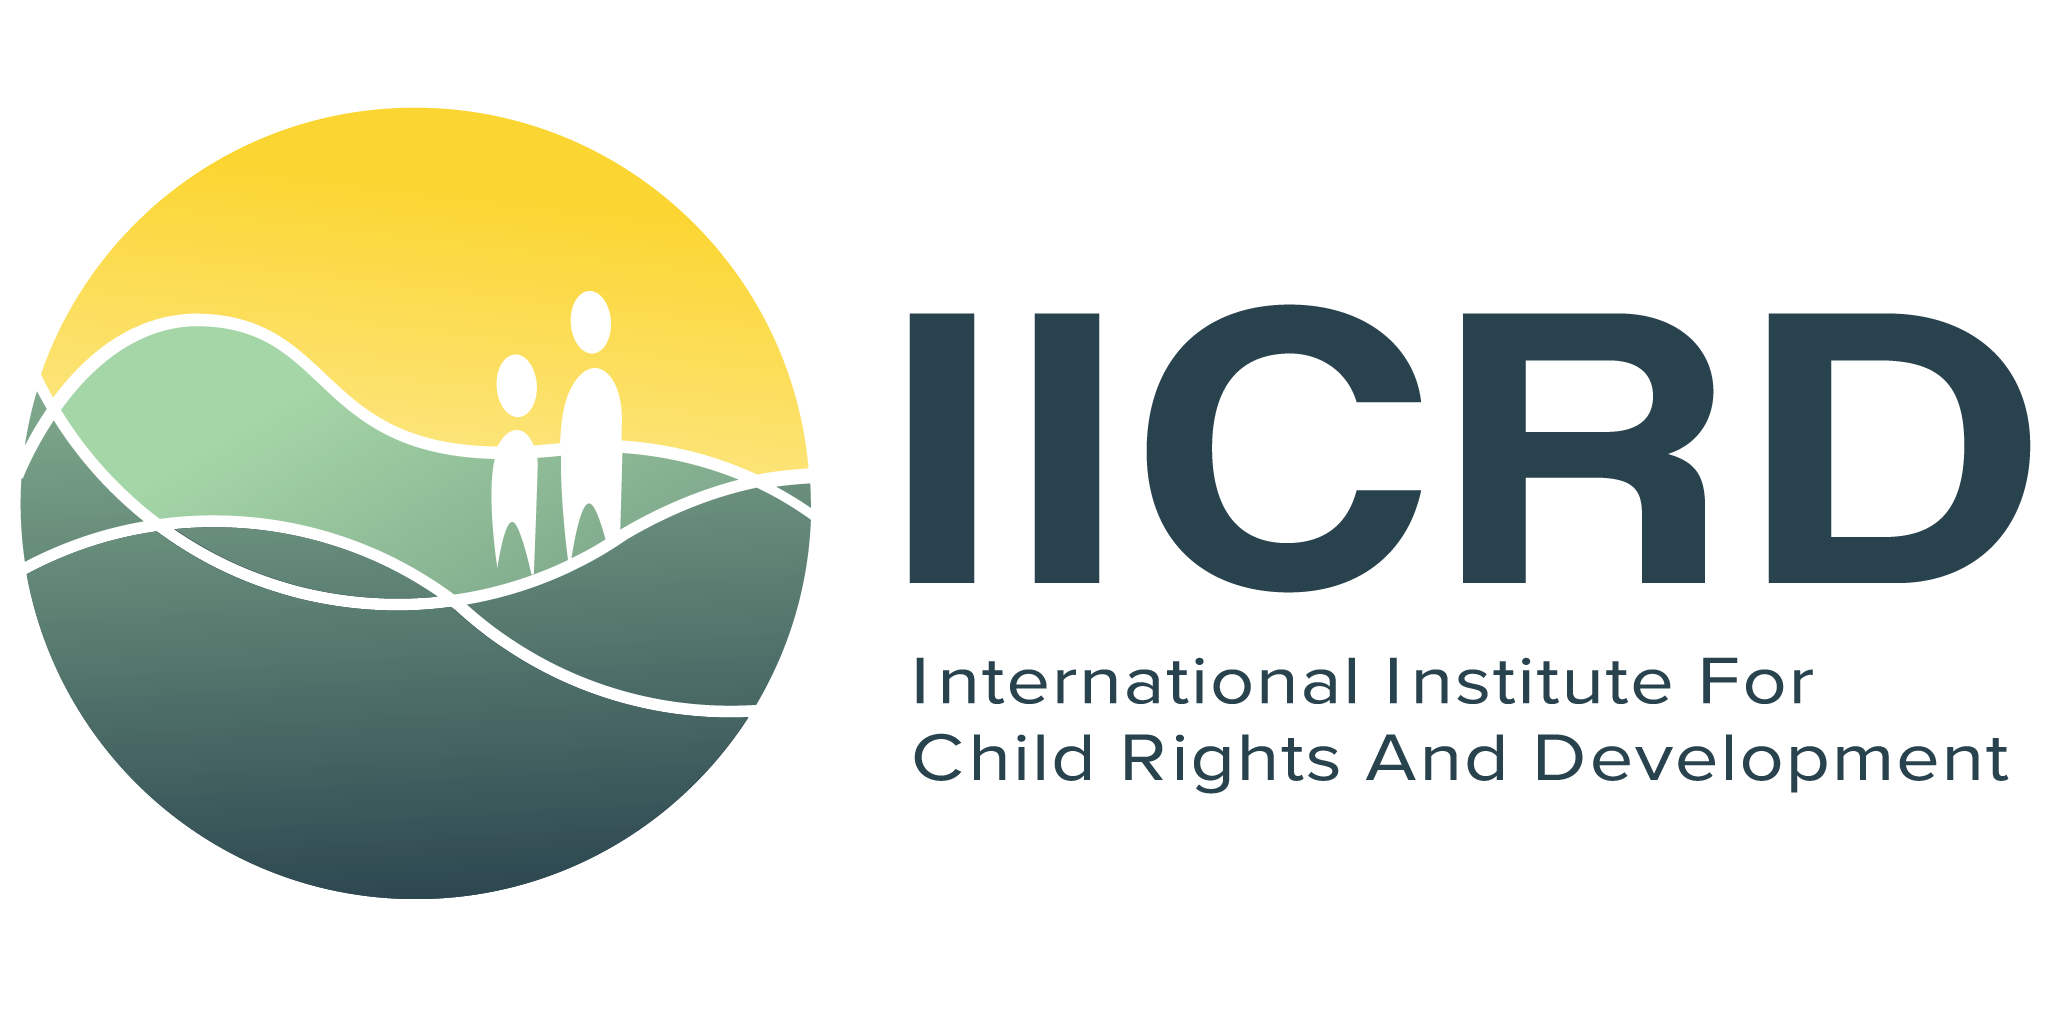 International Institute for Child Rights and Development